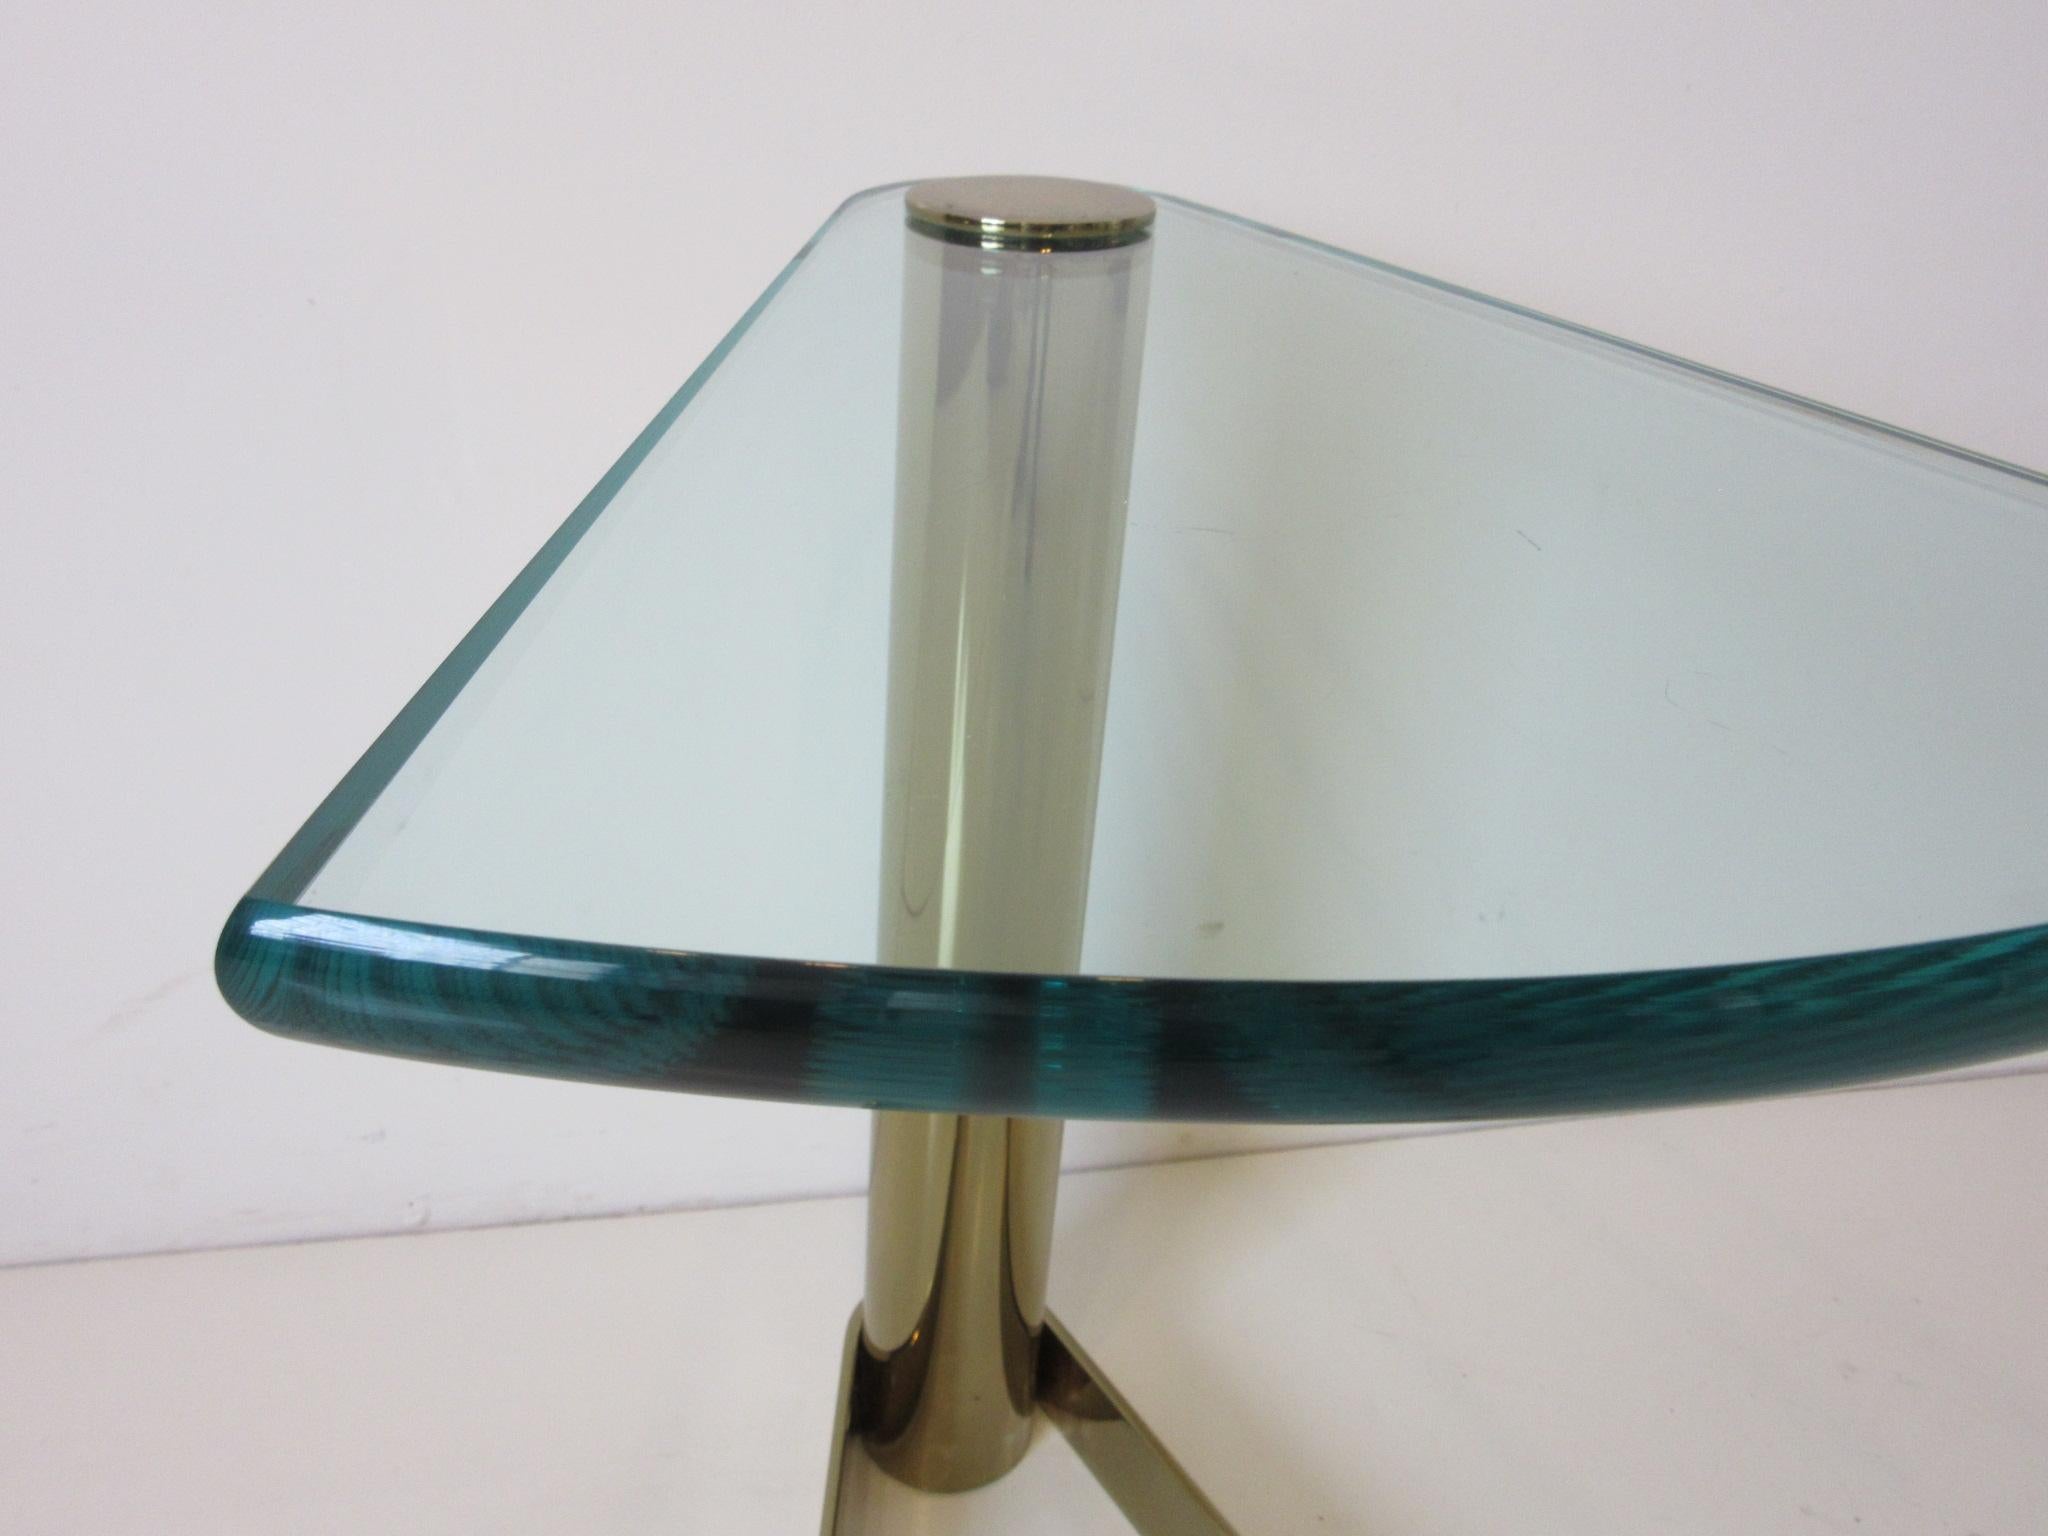 20th Century Wedge Brass / Glass Side Table from the Leon Pace Collection